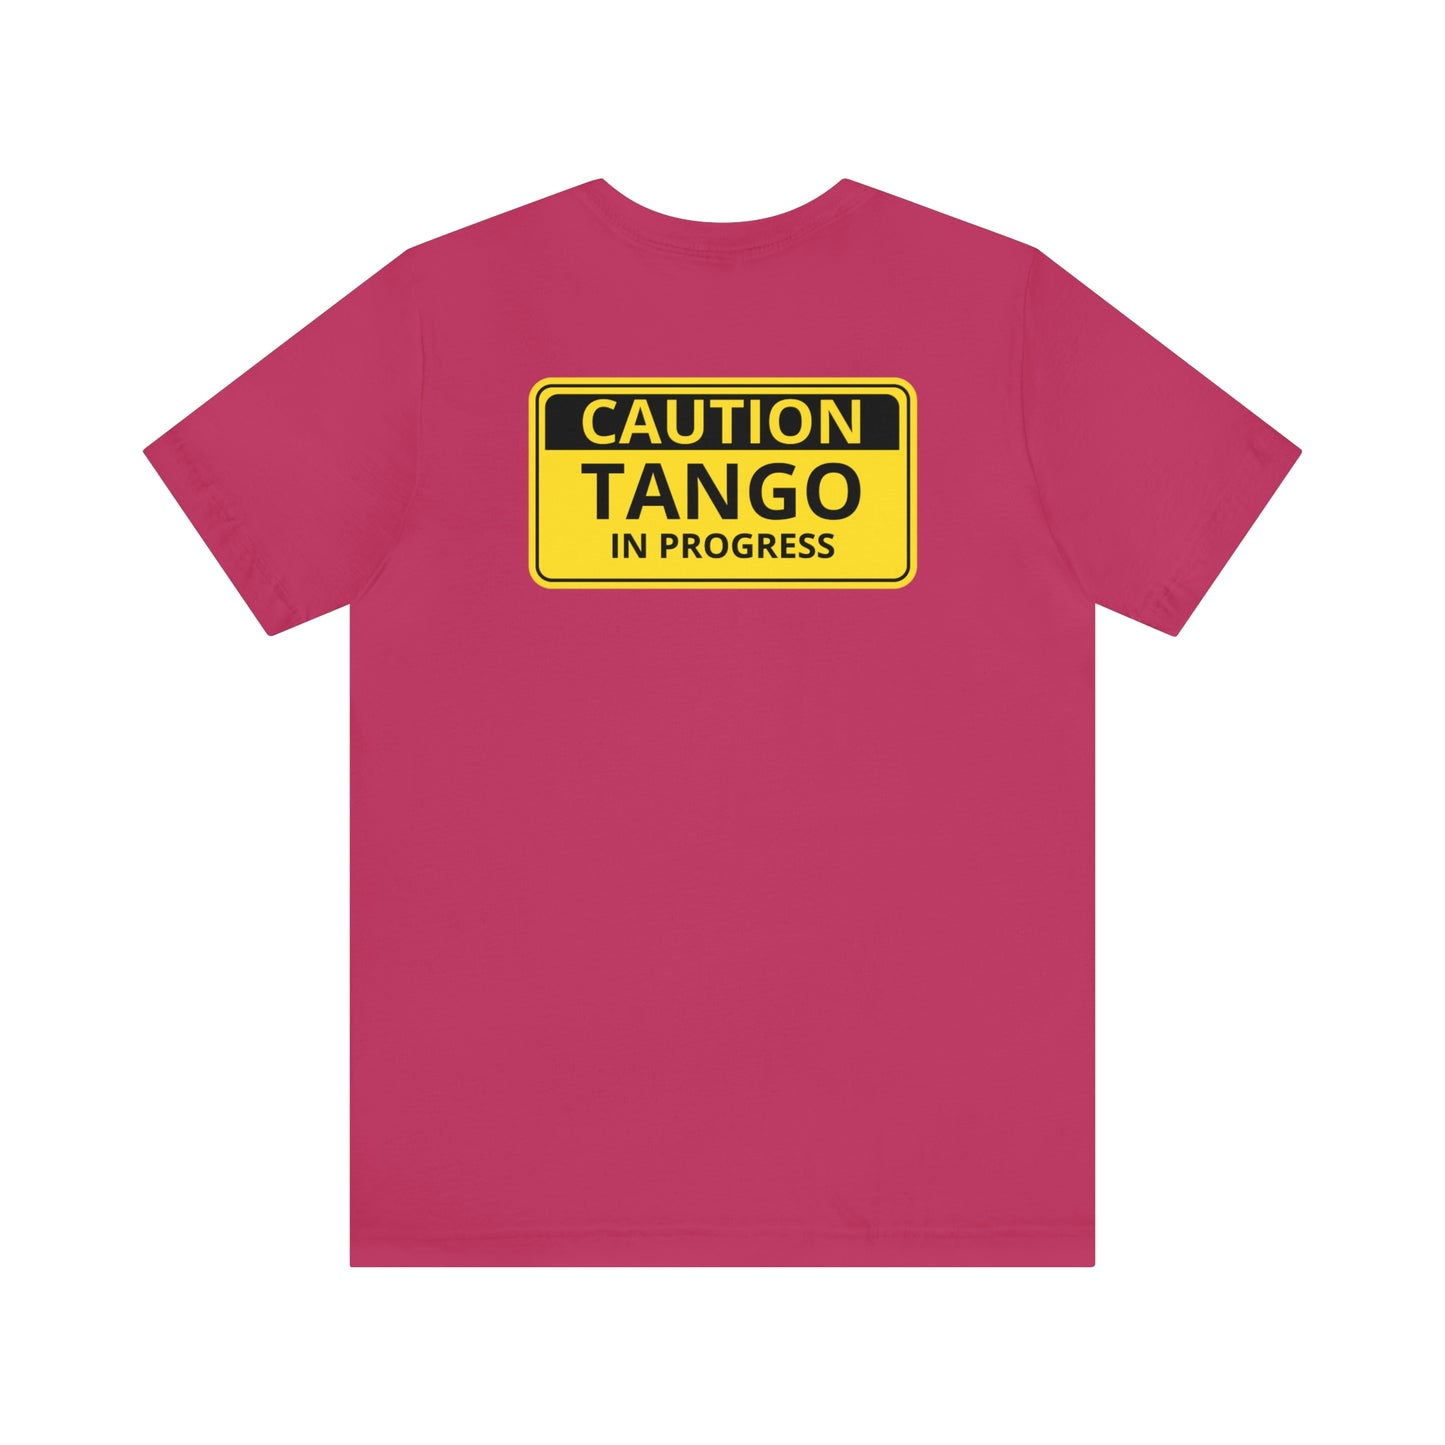 T-shirt with the text "Caution Tango in progress" written on a yellow warning sign